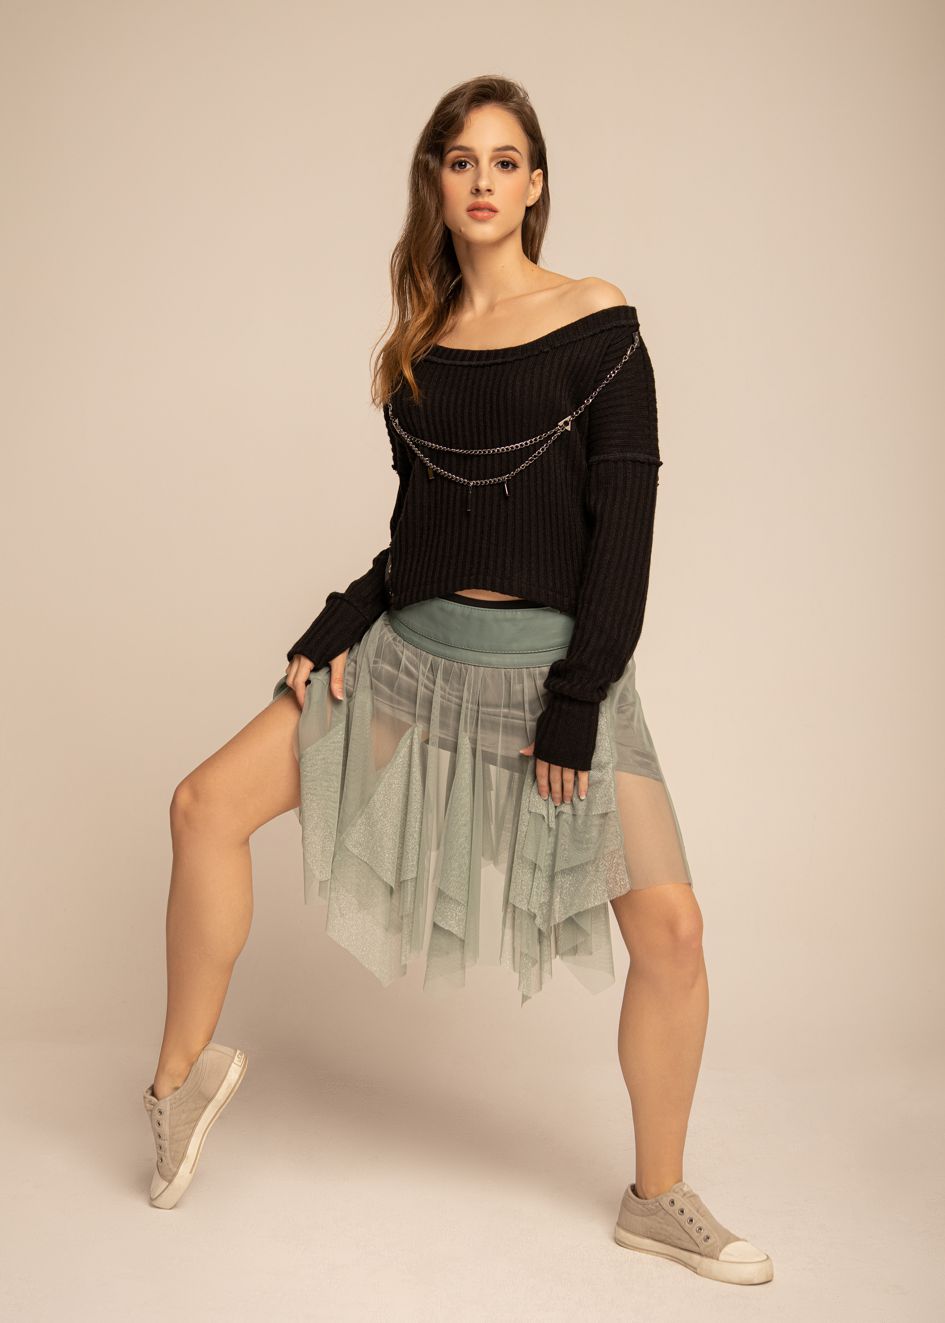 skirt made of tulle and leather, tulle skirt with a leather yoke with godets, yoke skirt made of Italian leather, skirt with a yoke made of natural leather and sage tulle, sage skirt with a yoke made of natural leather